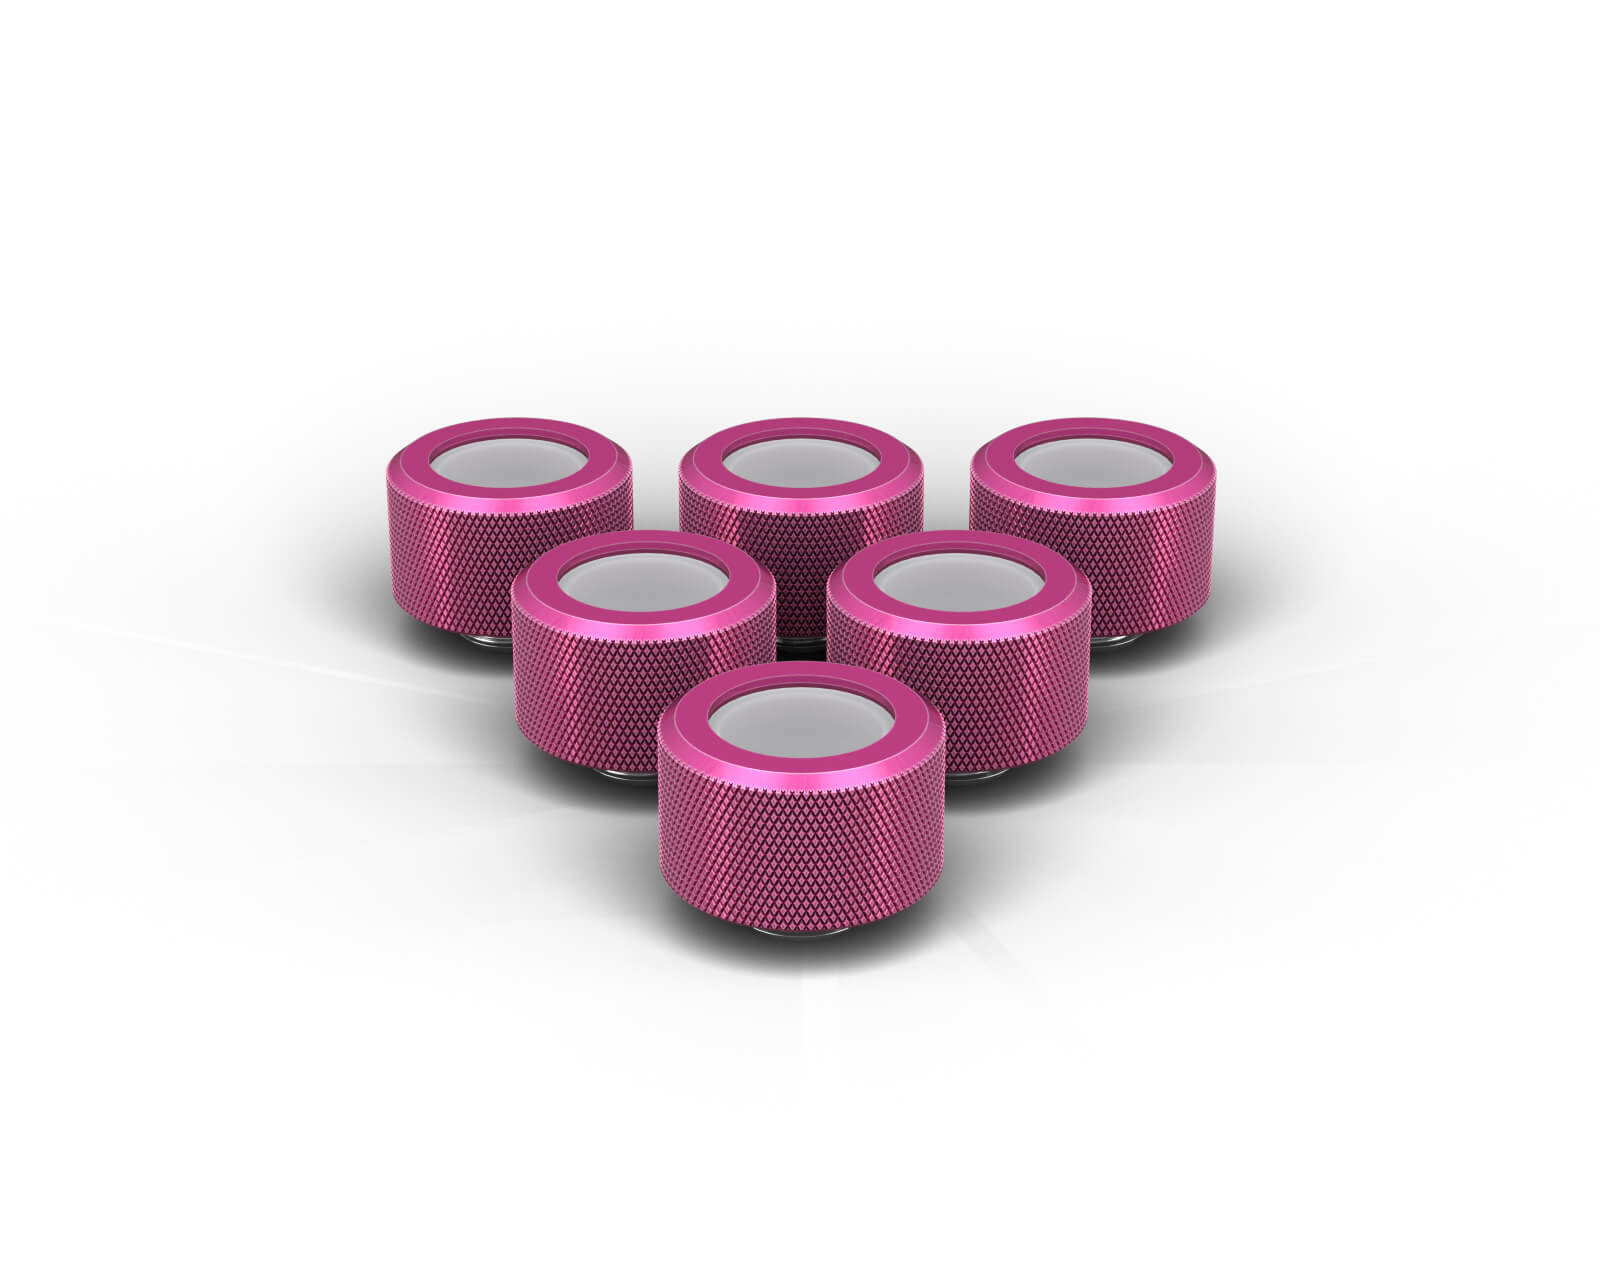 PrimoChill 16mm OD Rigid SX Fitting - 6 Pack - PrimoChill - KEEPING IT COOL Candy Pink